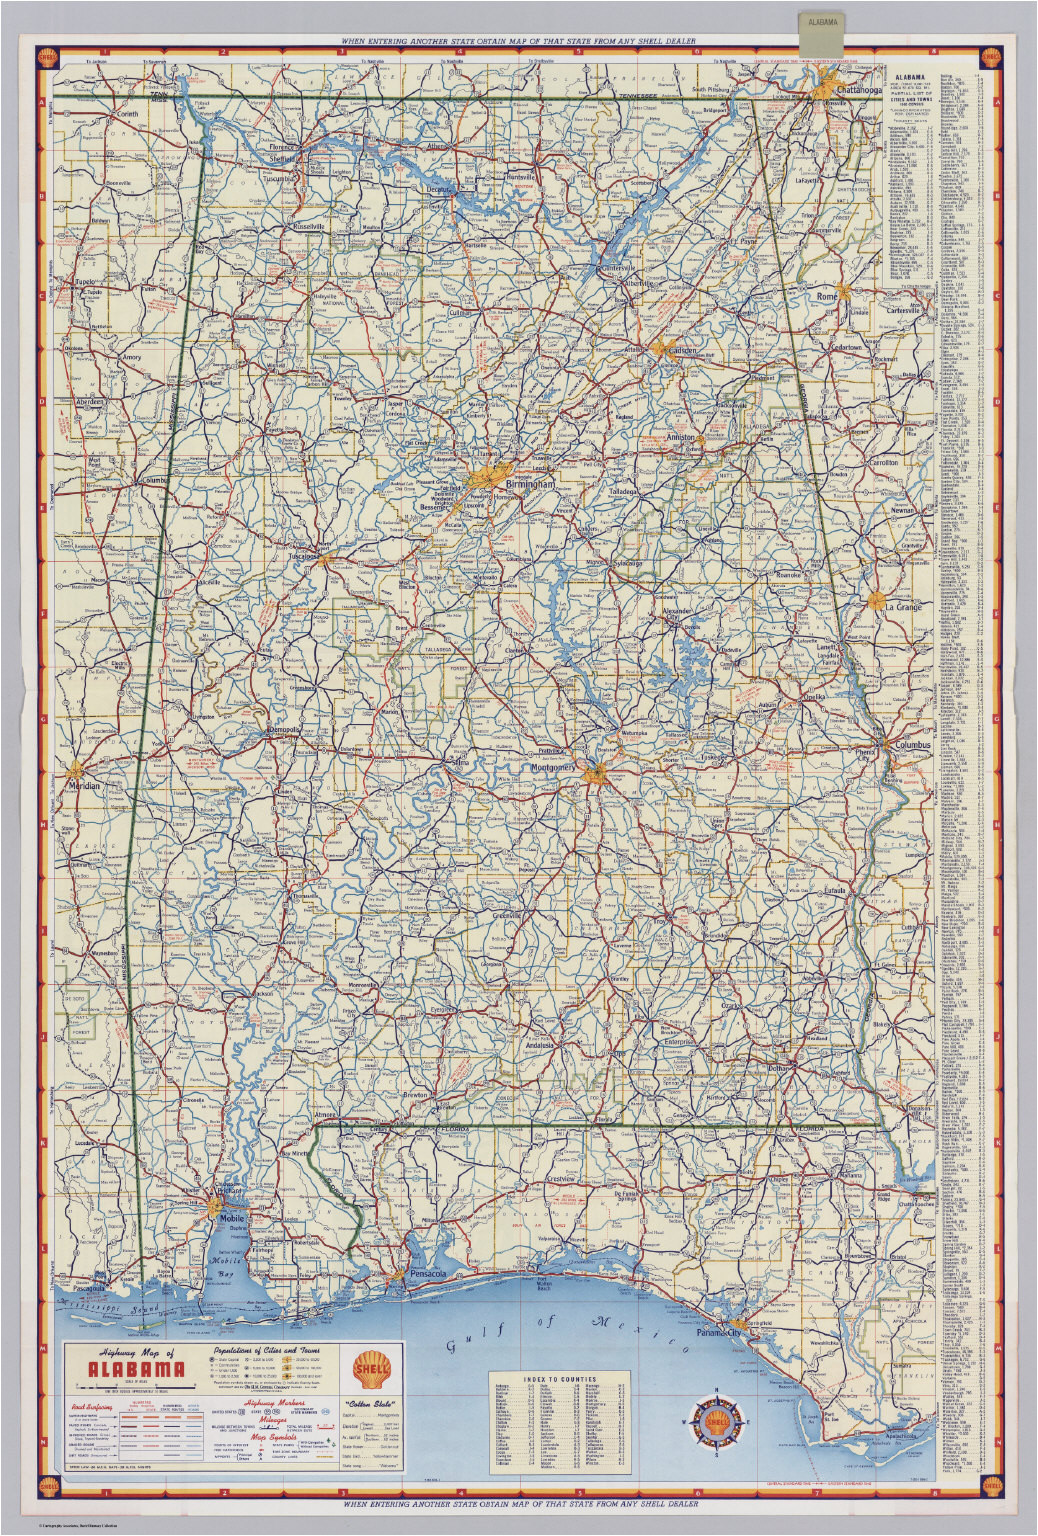 shell highway map of alabama david rumsey historical map collection